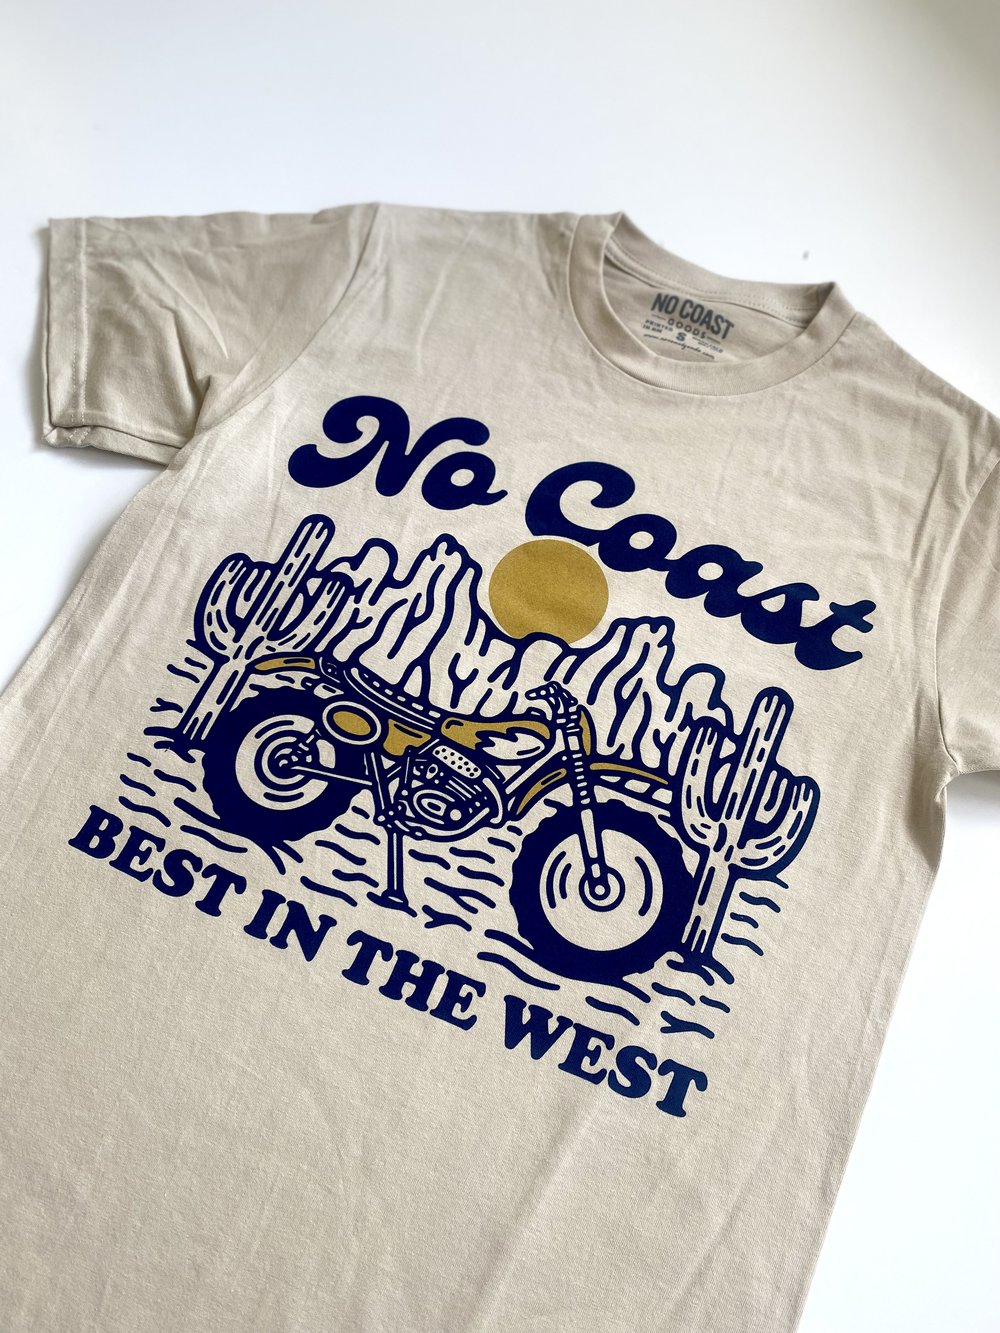 NO COAST COLLECTION  BEST IN THE WEST MOTORCYCLE